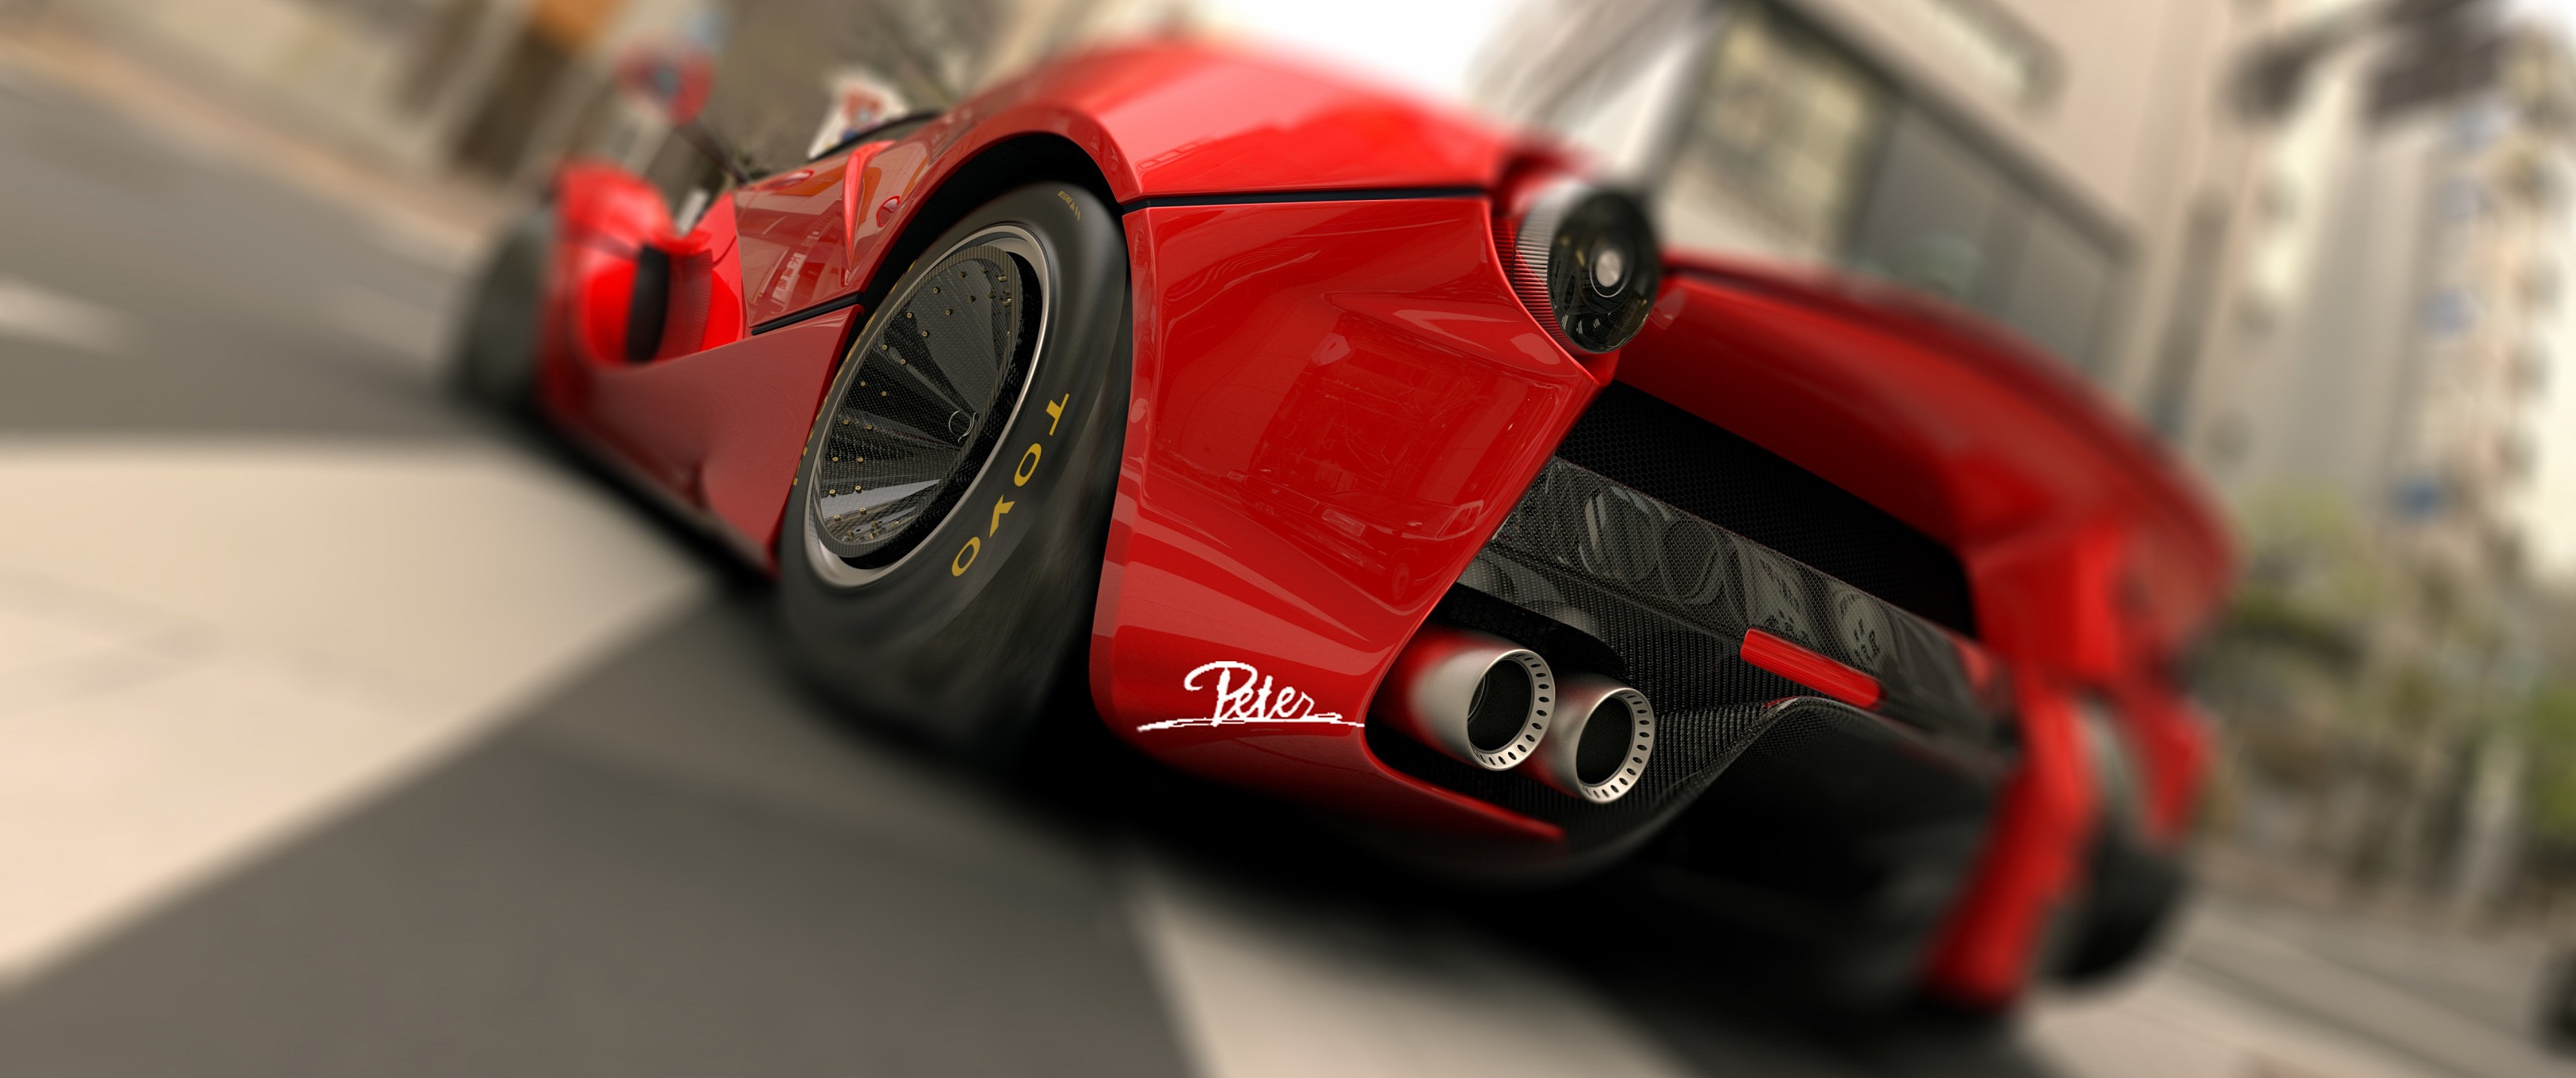 Download hd wallpapers of 351835car, Red Cars. Free download High 